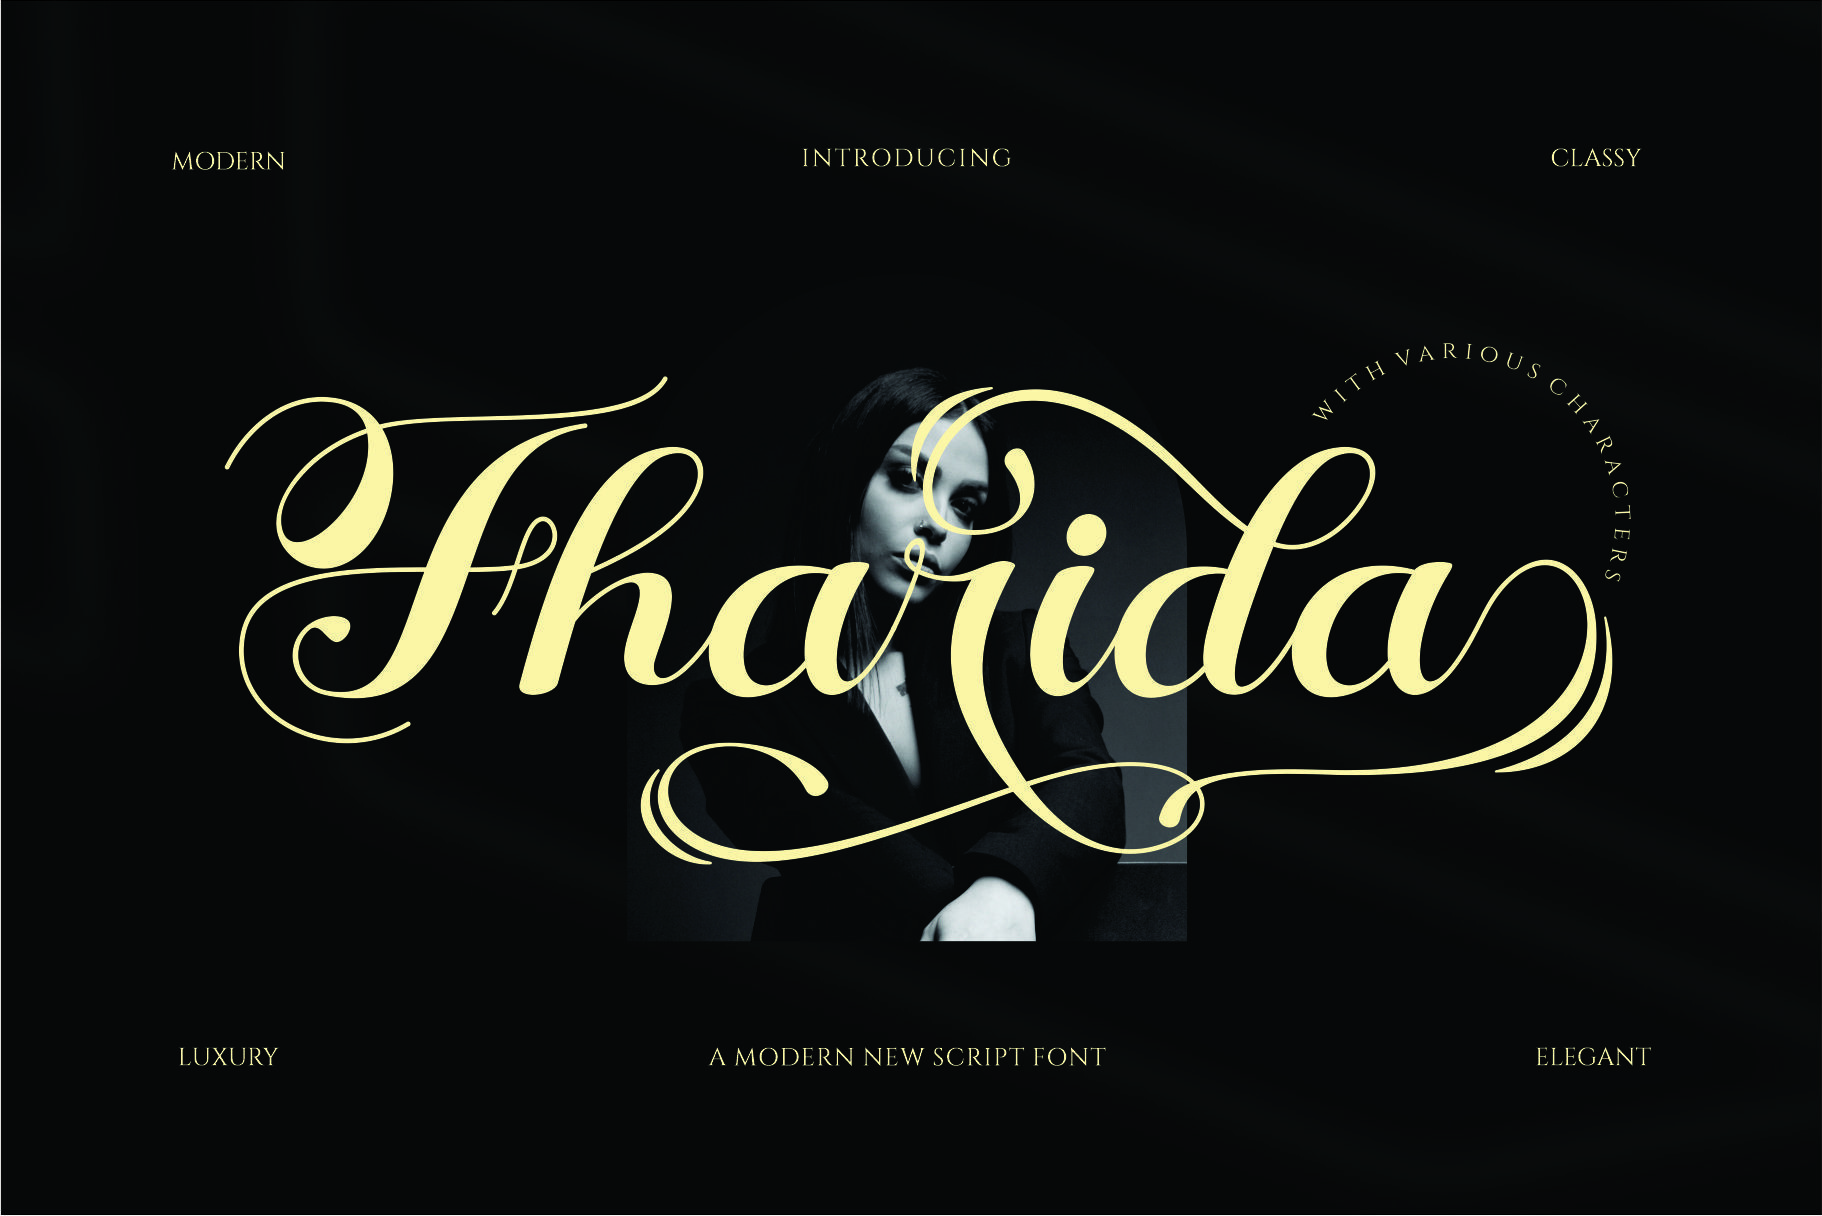 Preview and download Fharida font